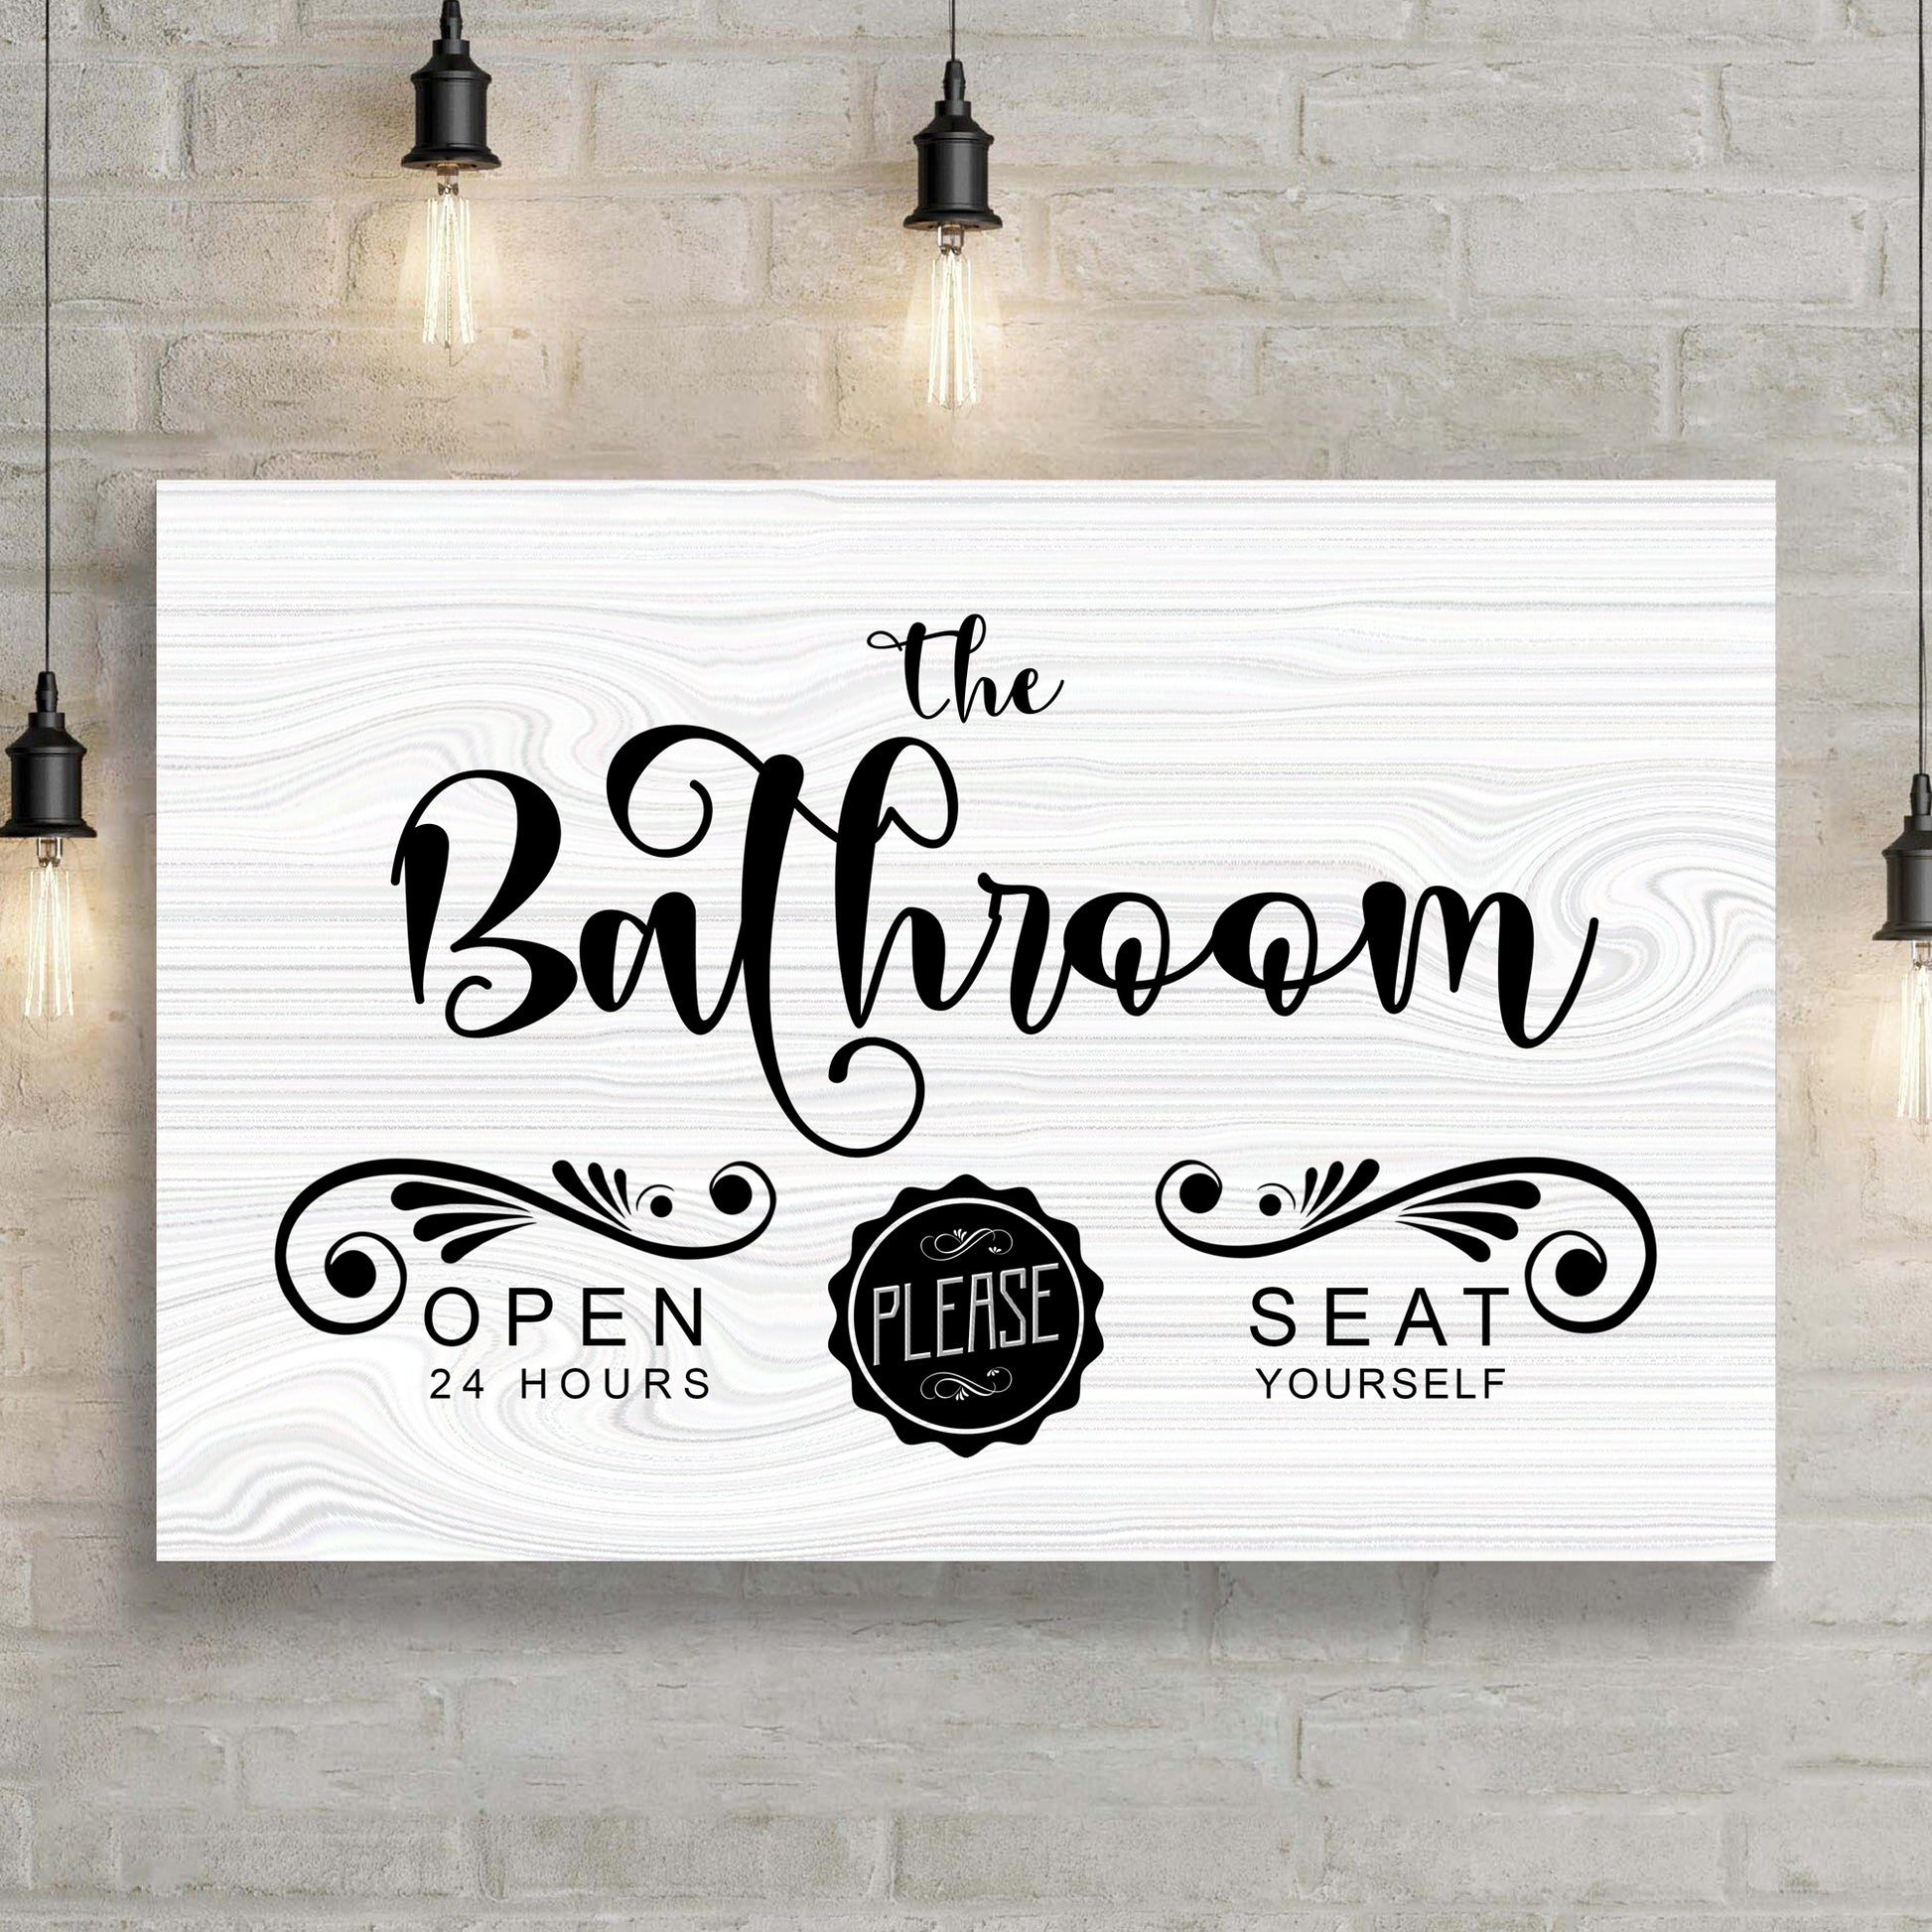 The Bathroom Sign II - Image by Tailored Canvases